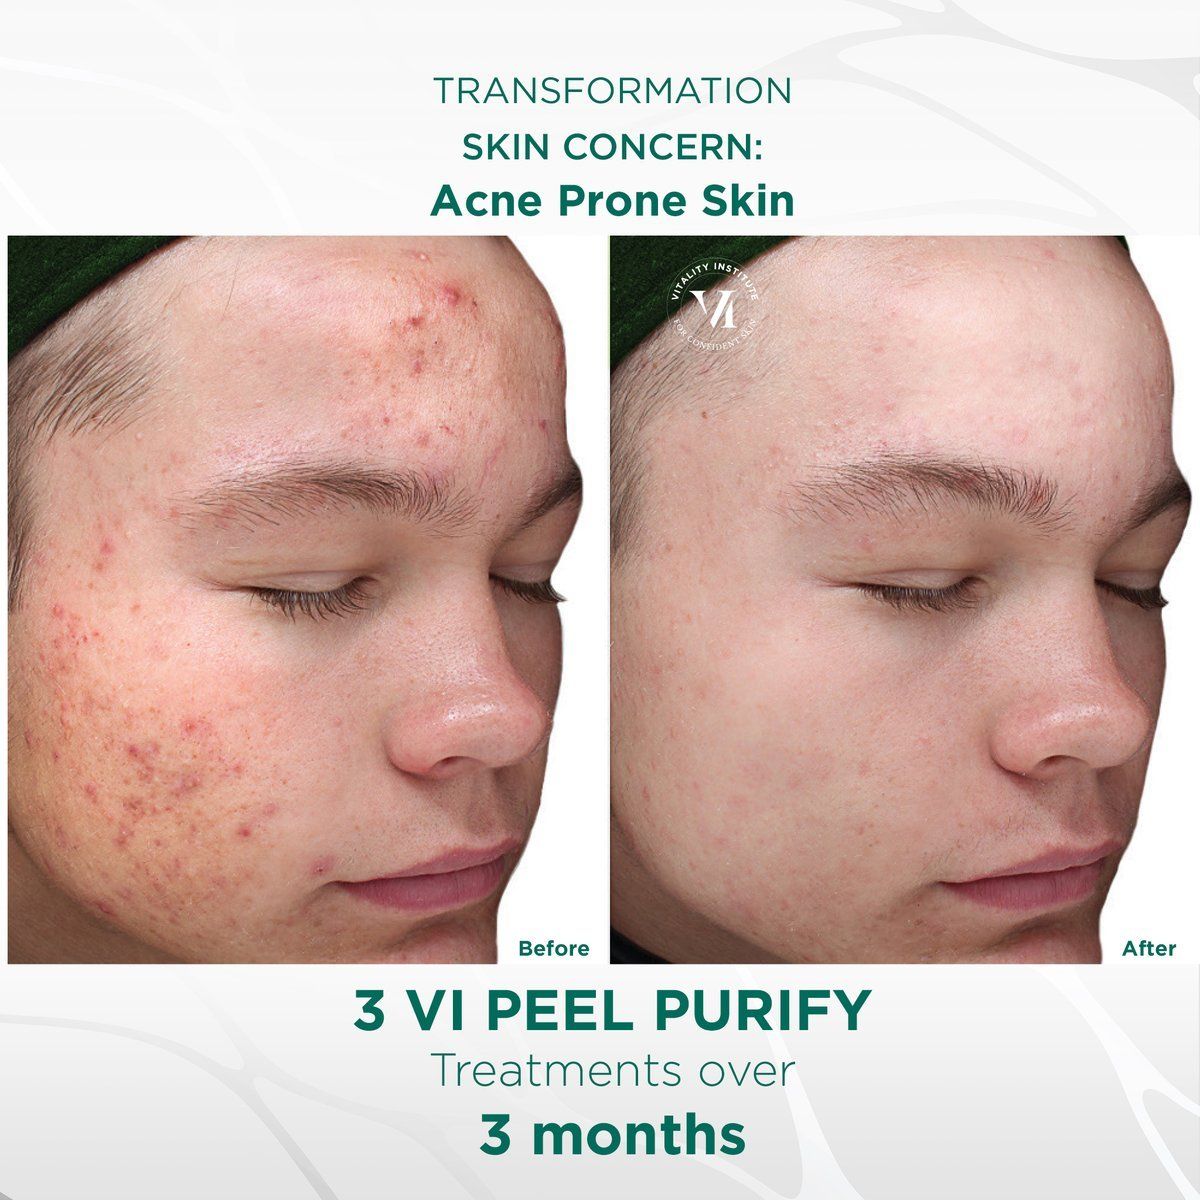 Vi Peel results- A before and after photo of a person 's face with acne prone skin